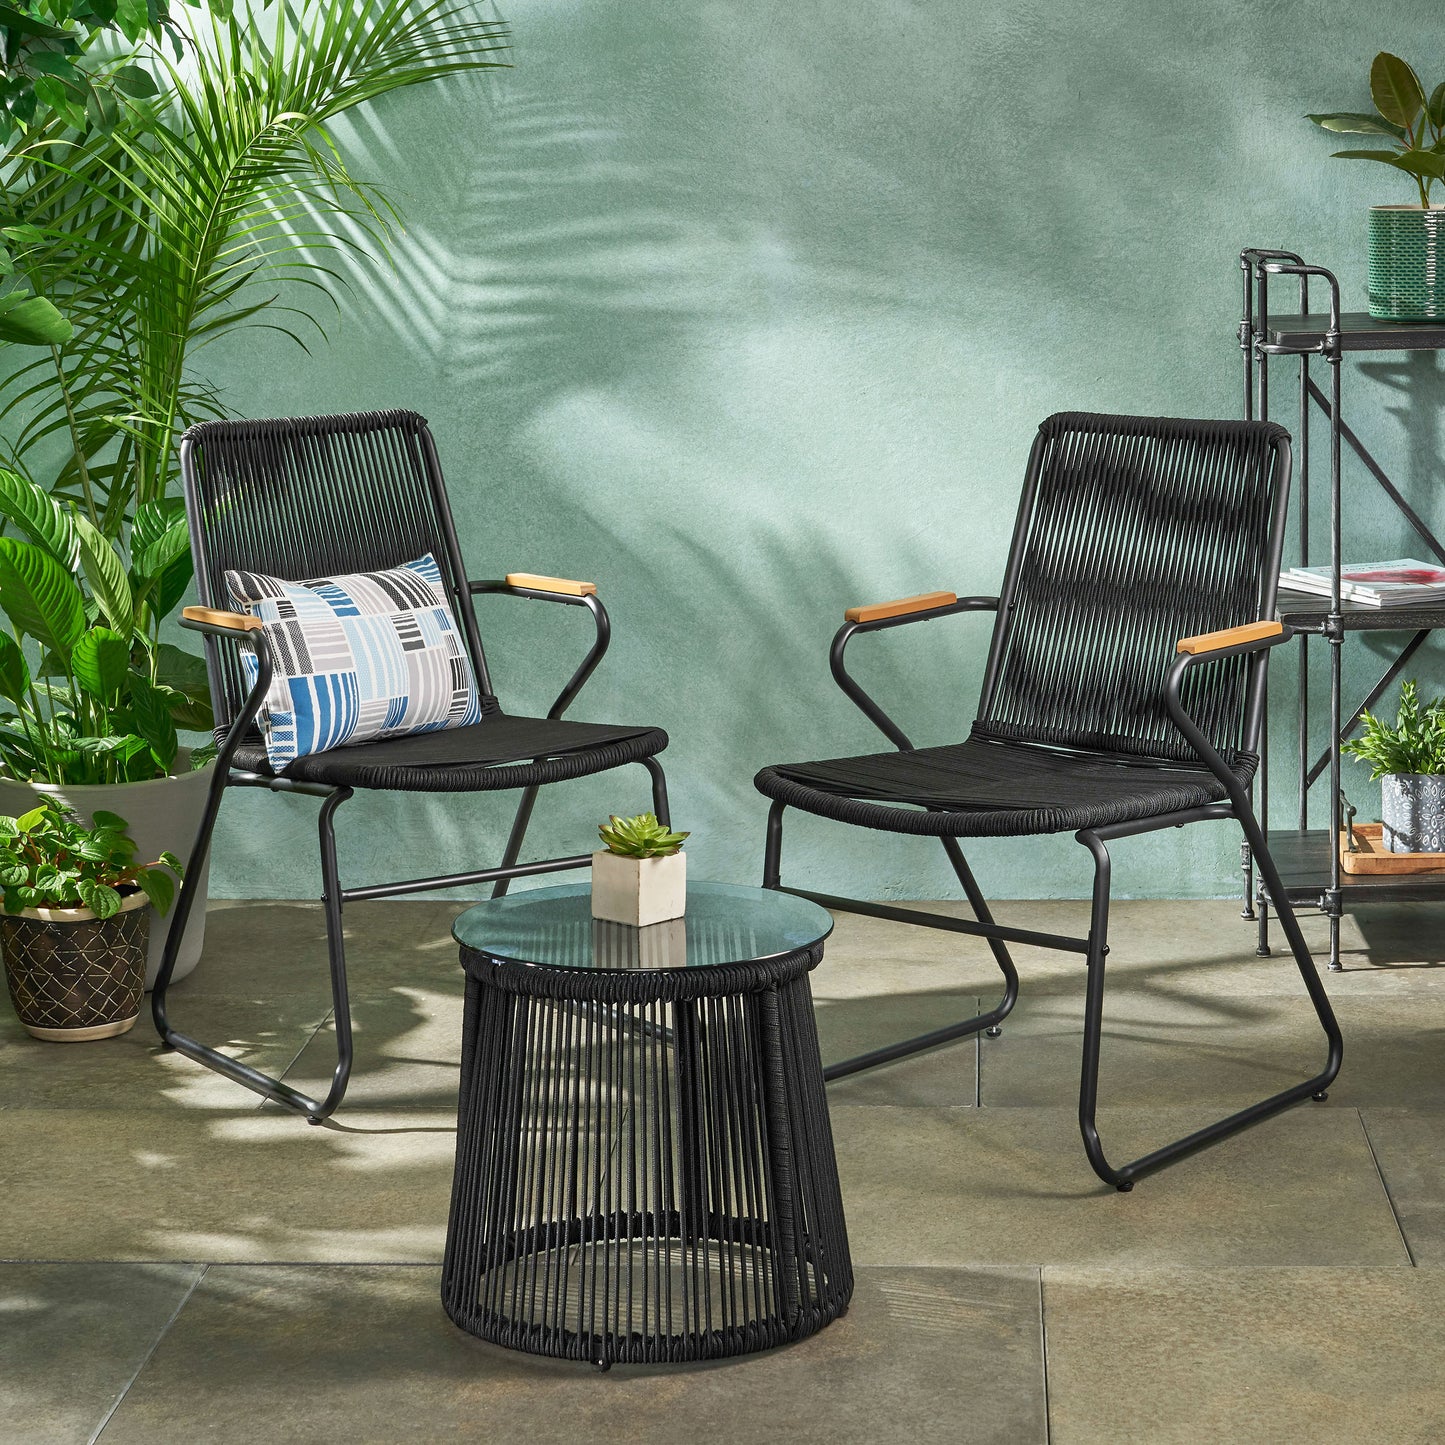 Laycee Modern Outdoor Rope Weave Chat Set with Side Table